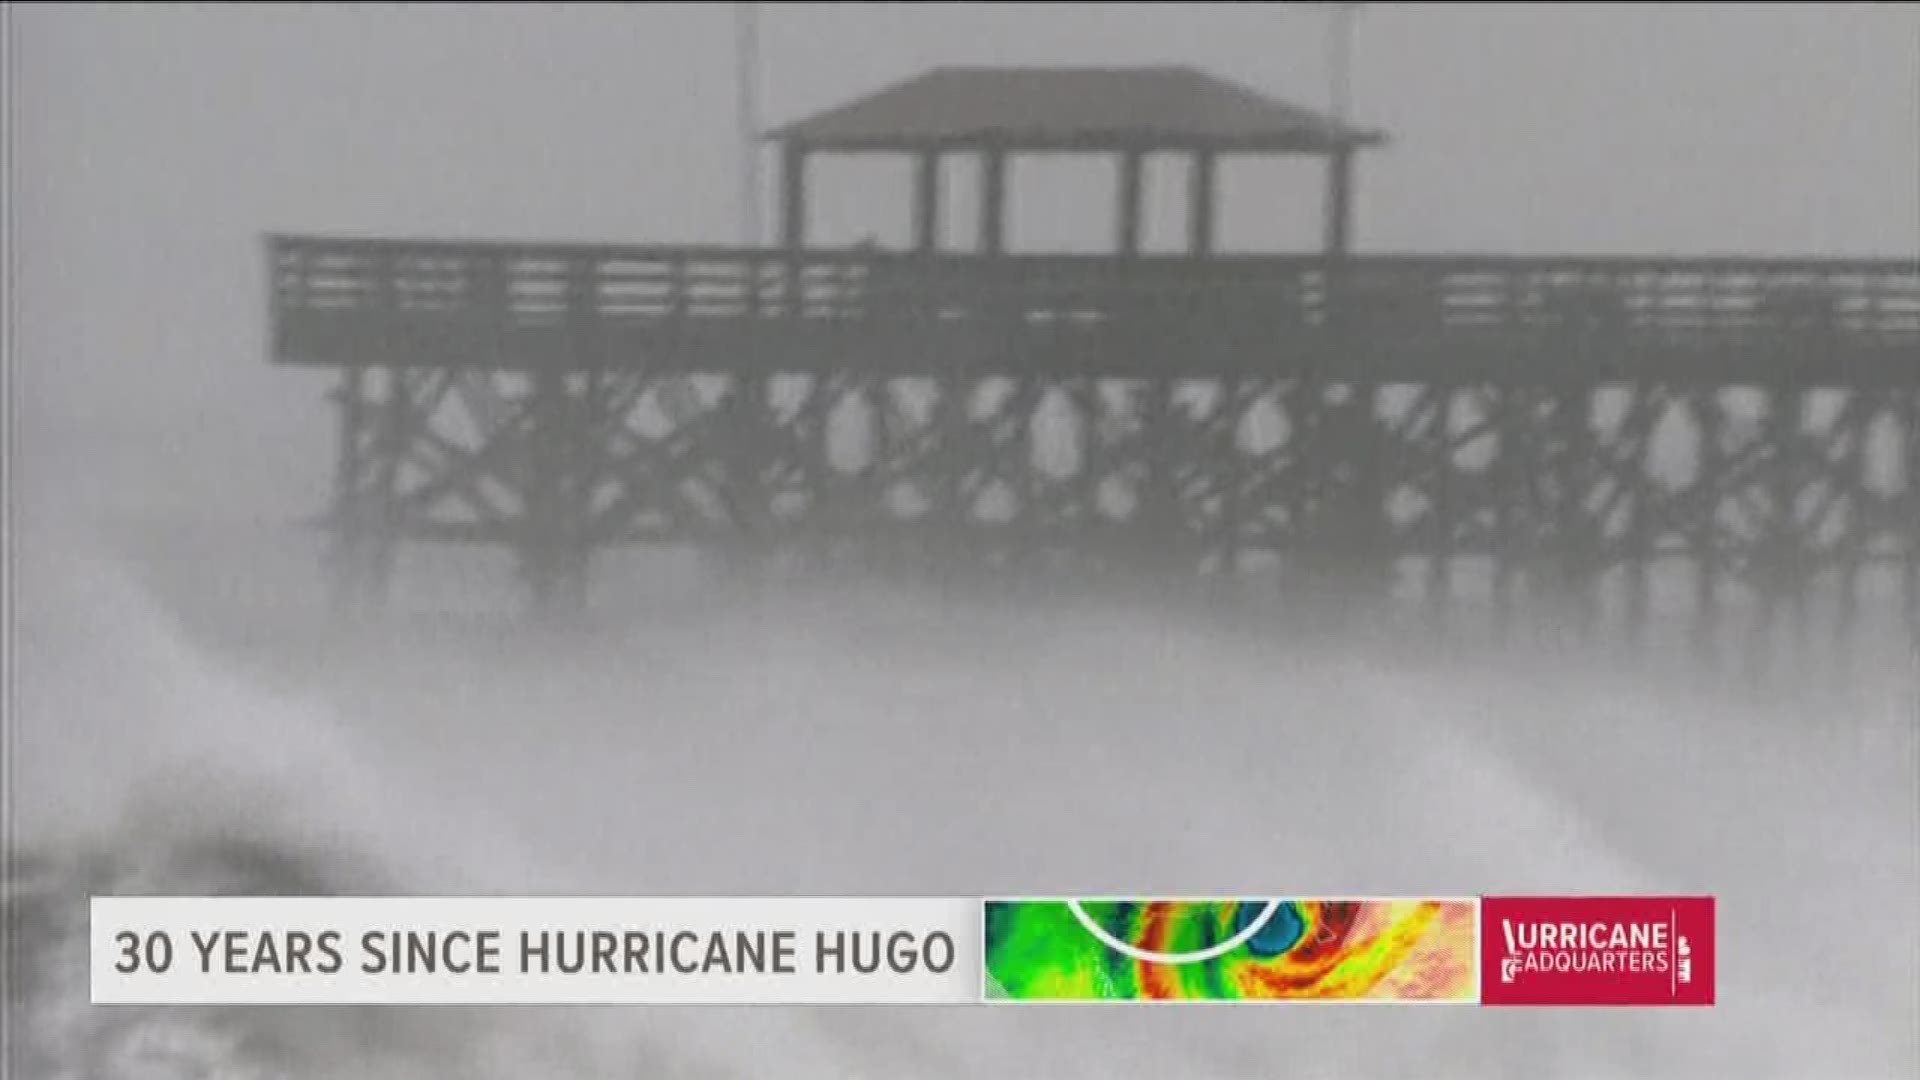 Thirty years ago this fall, Hurricane Hugo set its sights on the Carolinas. After devastating the South Carolina coast, it kept its strength all the way to the Charlotte area, leaving catastrophic damage in its path.